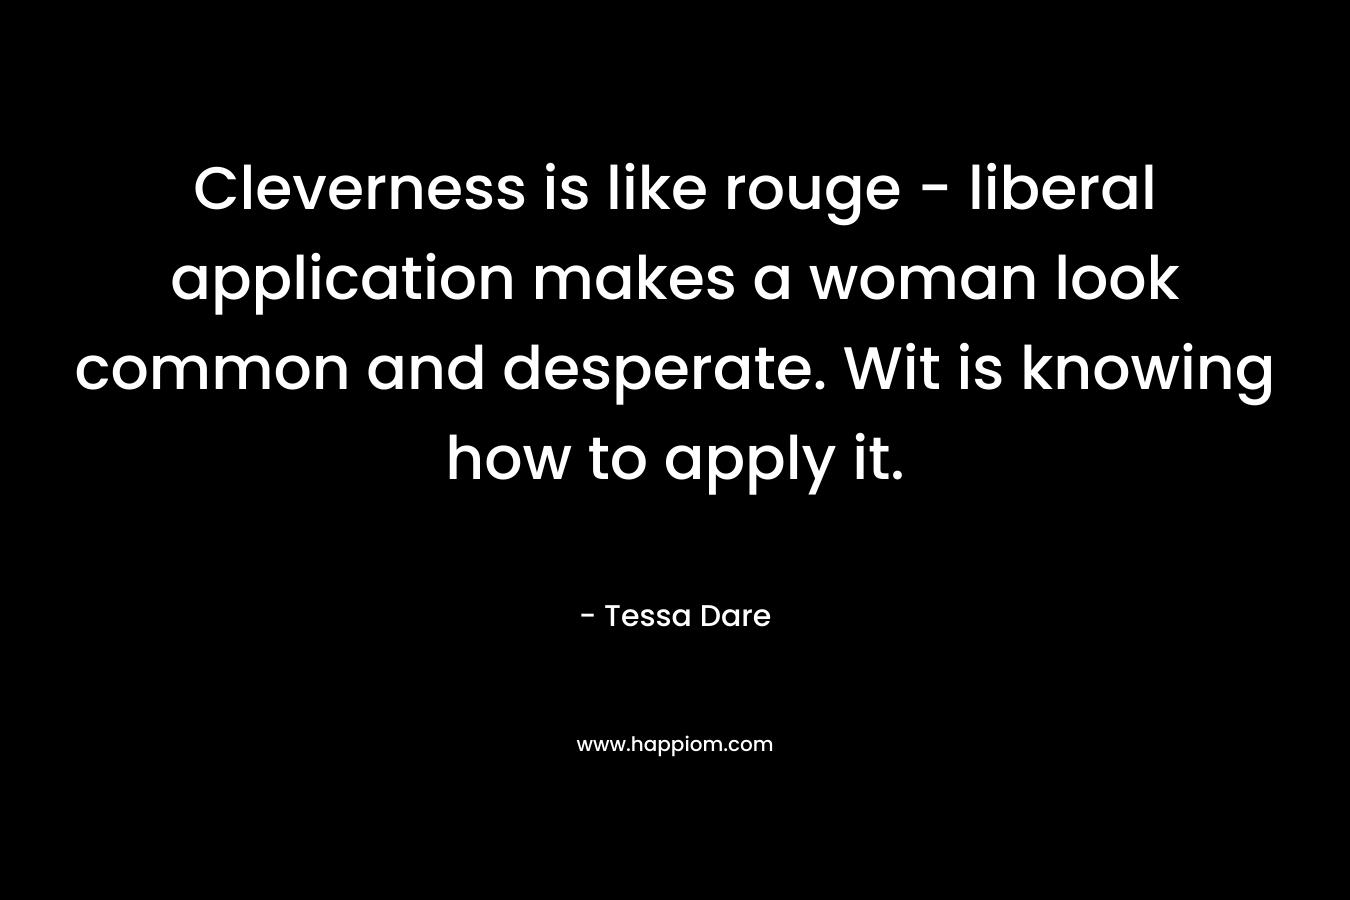 Cleverness is like rouge - liberal application makes a woman look common and desperate. Wit is knowing how to apply it.